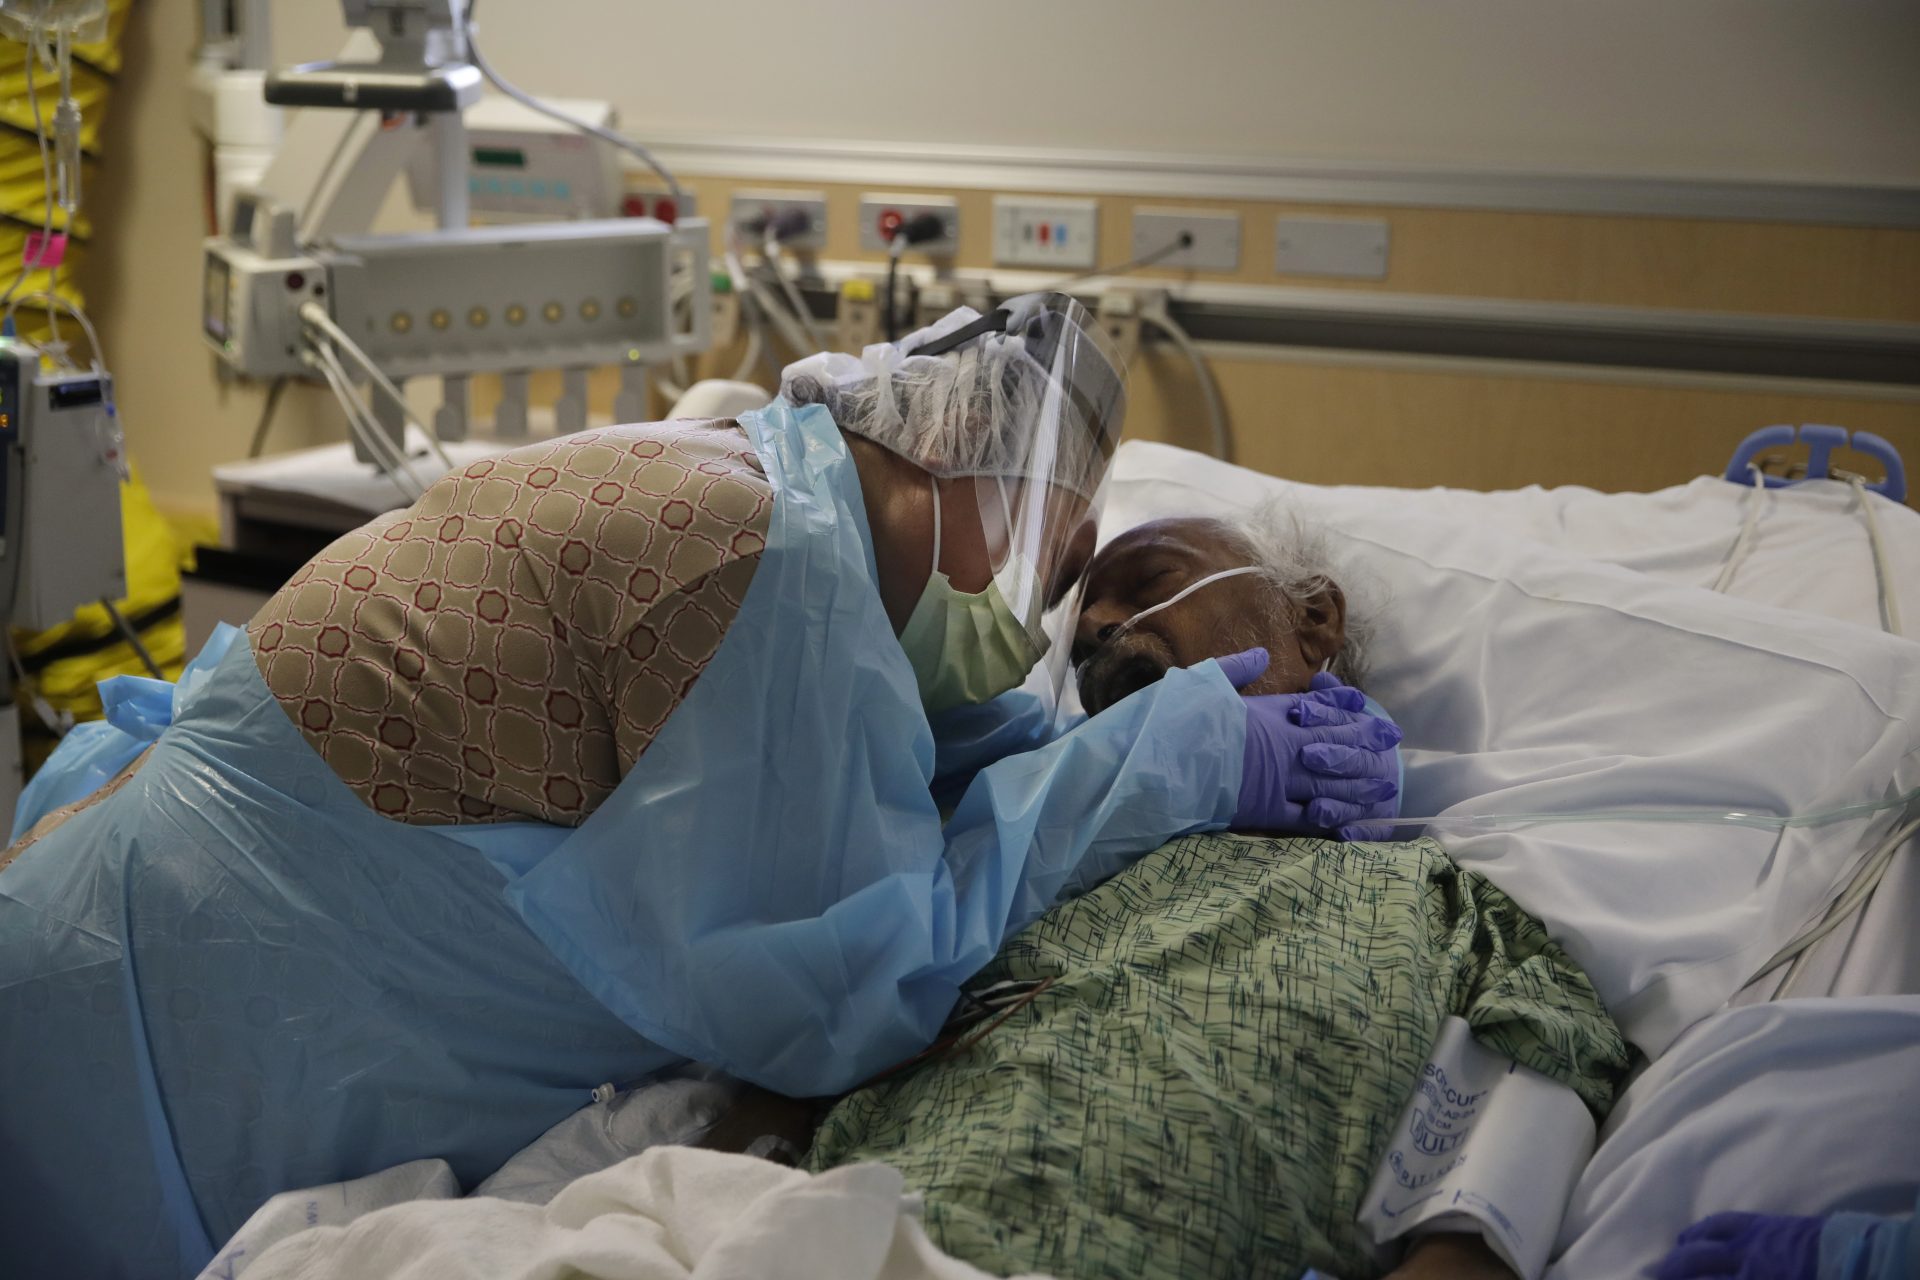 FILE PHOTO: In this July 31, 2020, file photo, Romelia Navarro, 64, weeps while hugging her husband, Antonio, in his final moments in a COVID-19 unit at St. Jude Medical Center in Fullerton, Calif. In November 2020, California reached an unwelcome coronavirus record: its 1 millionth positive test.